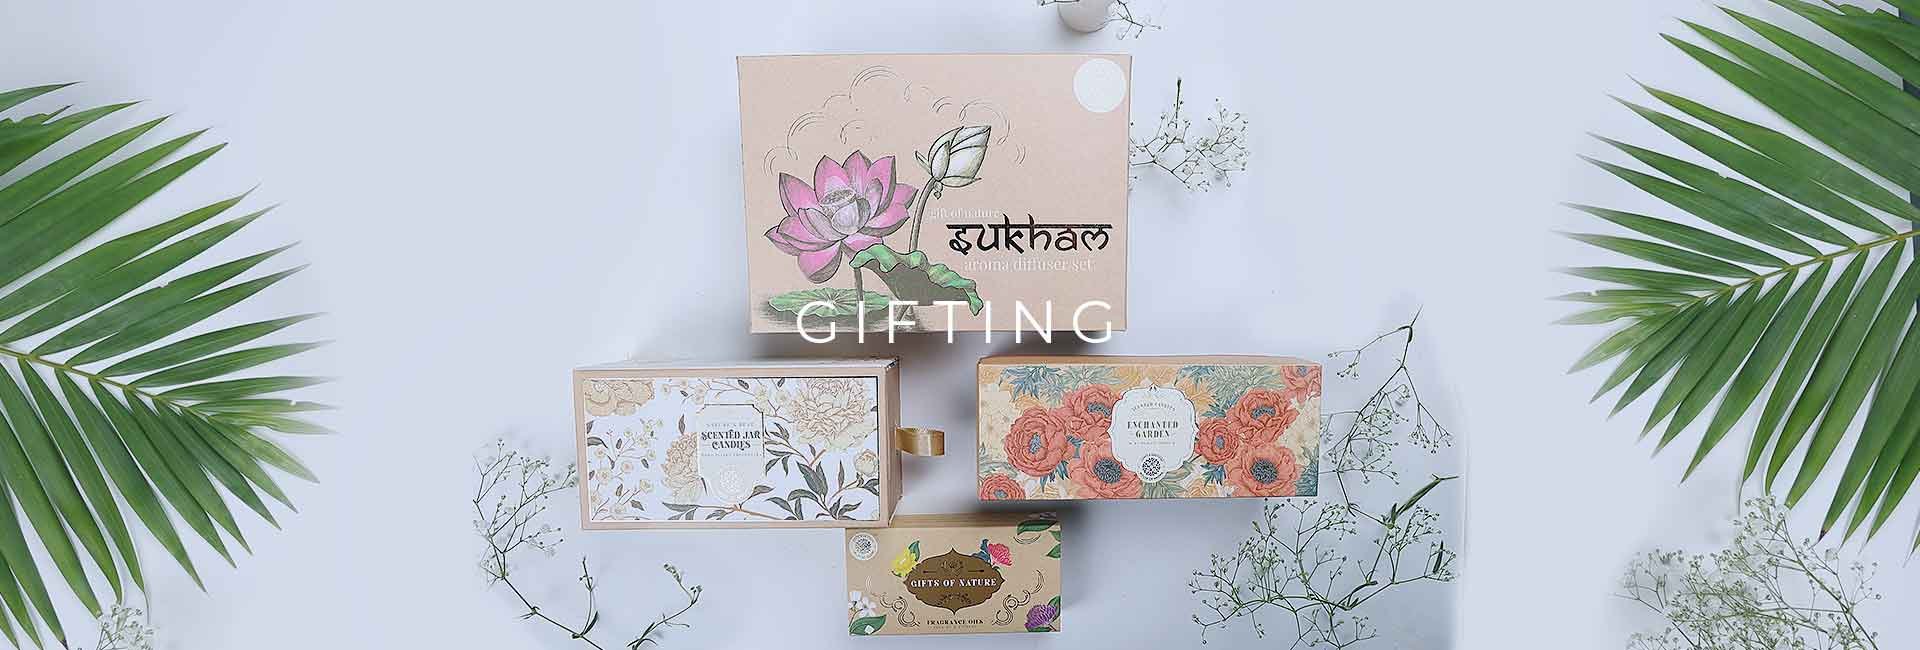 gifting, gift box online, gifting vouchers, gifting questions, happy birthday gift box online, gifting dry fruits, gifting boxes, gifting ideas for wedding, gifting articles, gifting hamper ideas, new gifting ideas, buy gift box online, candles gift pack, essential oil gift box, fragrance oil gift box, candles for gifting, gifting scented candles, scented candles for gifting, perfume gift packaging, candles gift box, fragrance candle gift set, essential oil gift sets, candles gift basket, essential oil gift pack, essential oil gift set with diffuser, scented oil gift set, fragrance oil gift sets, candle gift set online, perfume oil gift set, fragrance oils gift box, essential oil gift basket, home decor candle gift set, scented candles gift box, diwali candles gift pack, candle for diwali, scented candles gift set, home decor candle, home decor gift ideas, scented candles for gifting, diwali gift box ideas, fragrance candle gift set, home decor scented candles, home decor candle sets, diwali candle gift set, soy candles gift box, candles gift pack, soy candles gift box, candle gift set online, candles for gifting, gifting scented candles